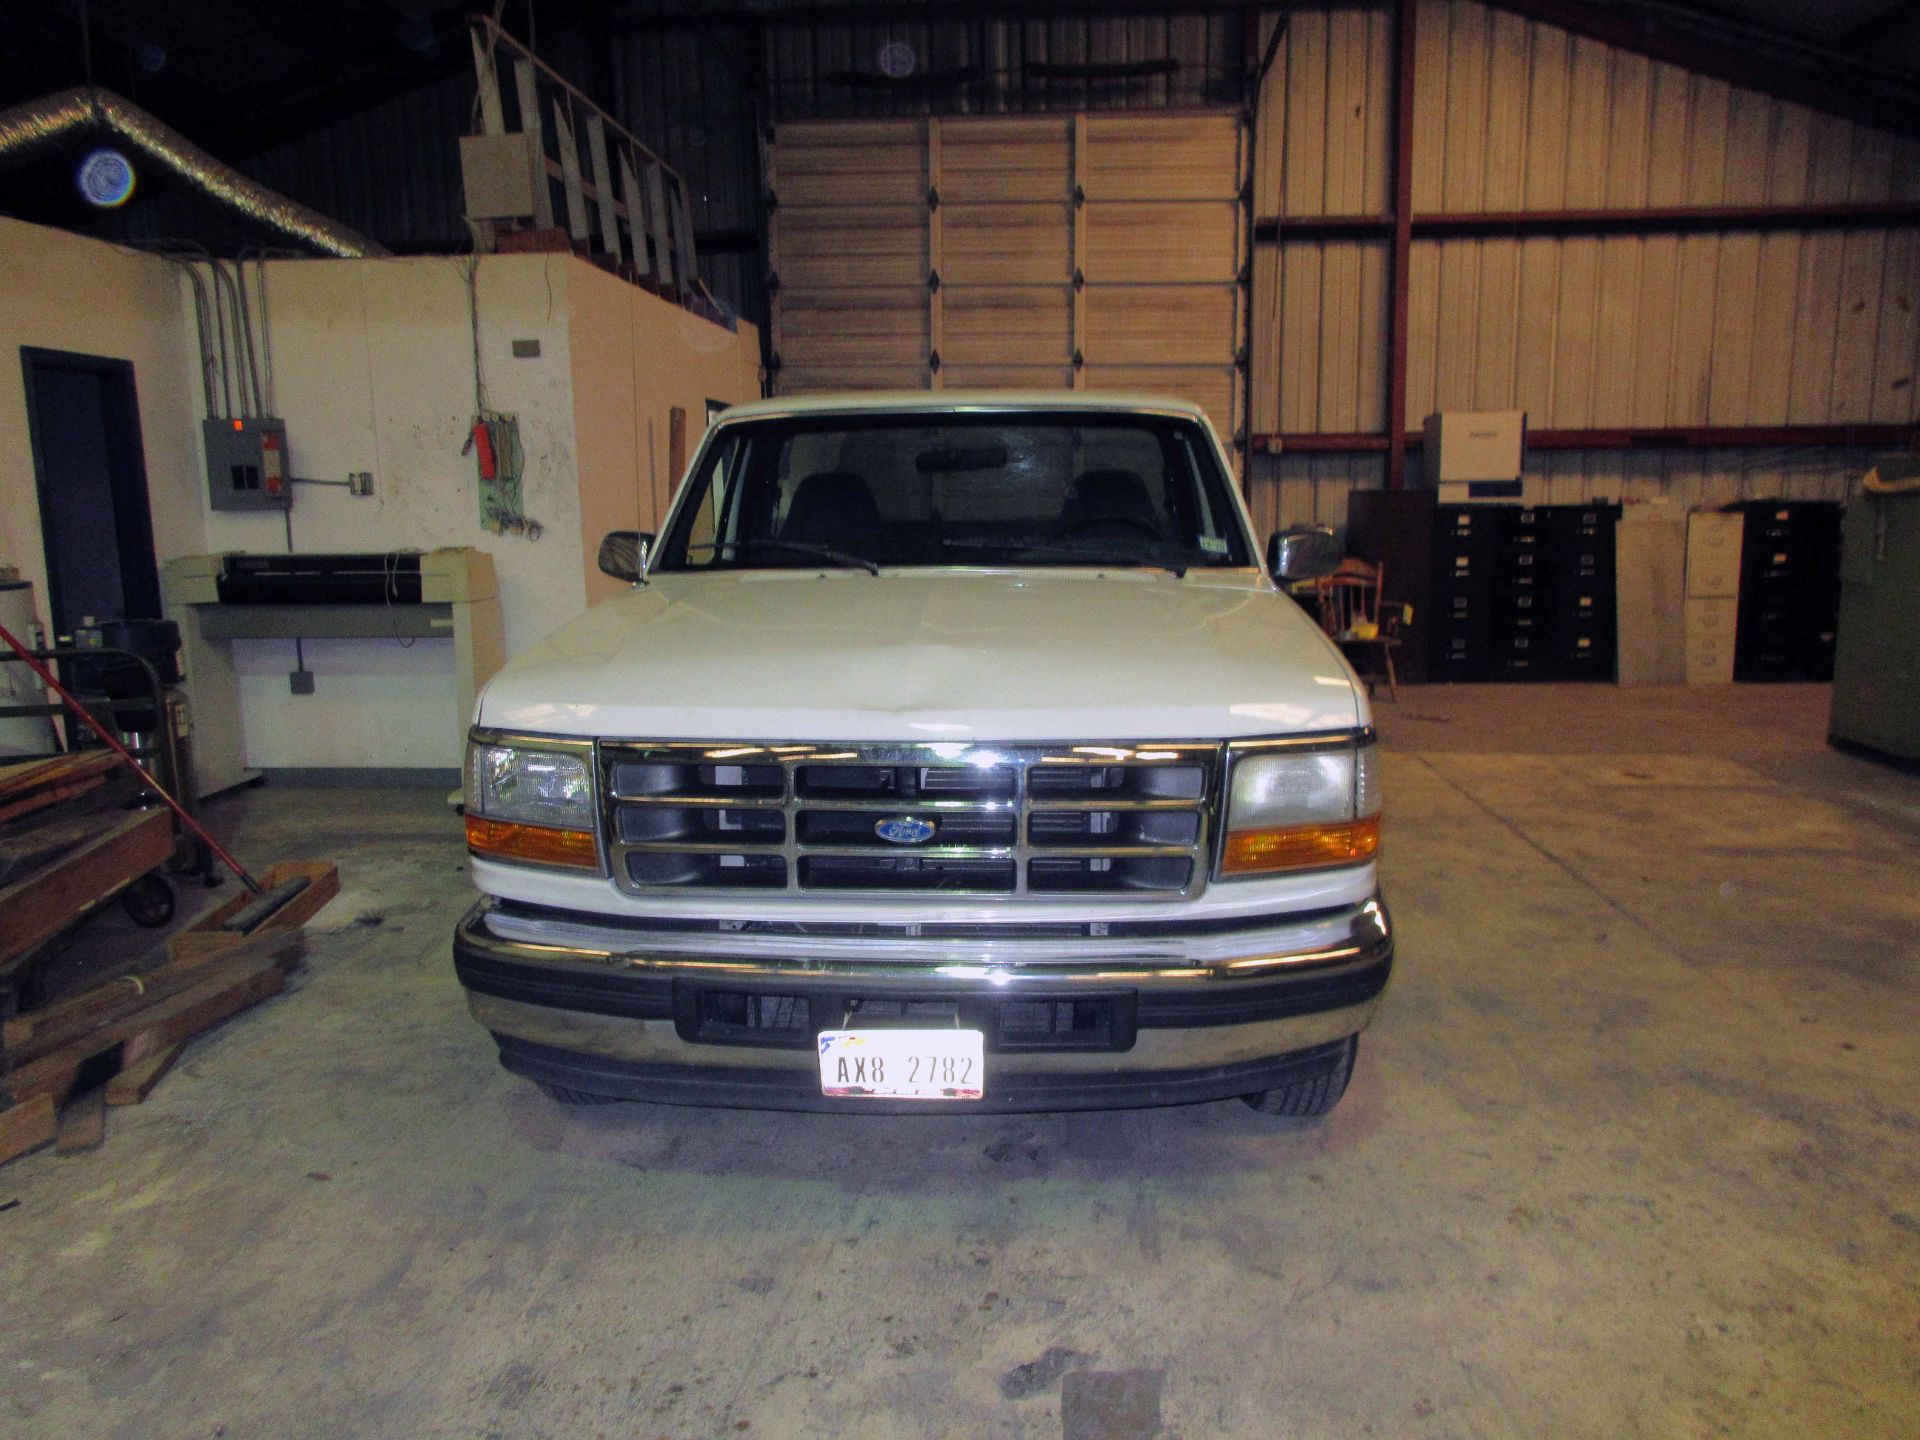 PICKUP TRUCK, 1996 FORD MDL. F150XLT, gasoline engine, auto. trans., Odo: 149,000 miles, Texas